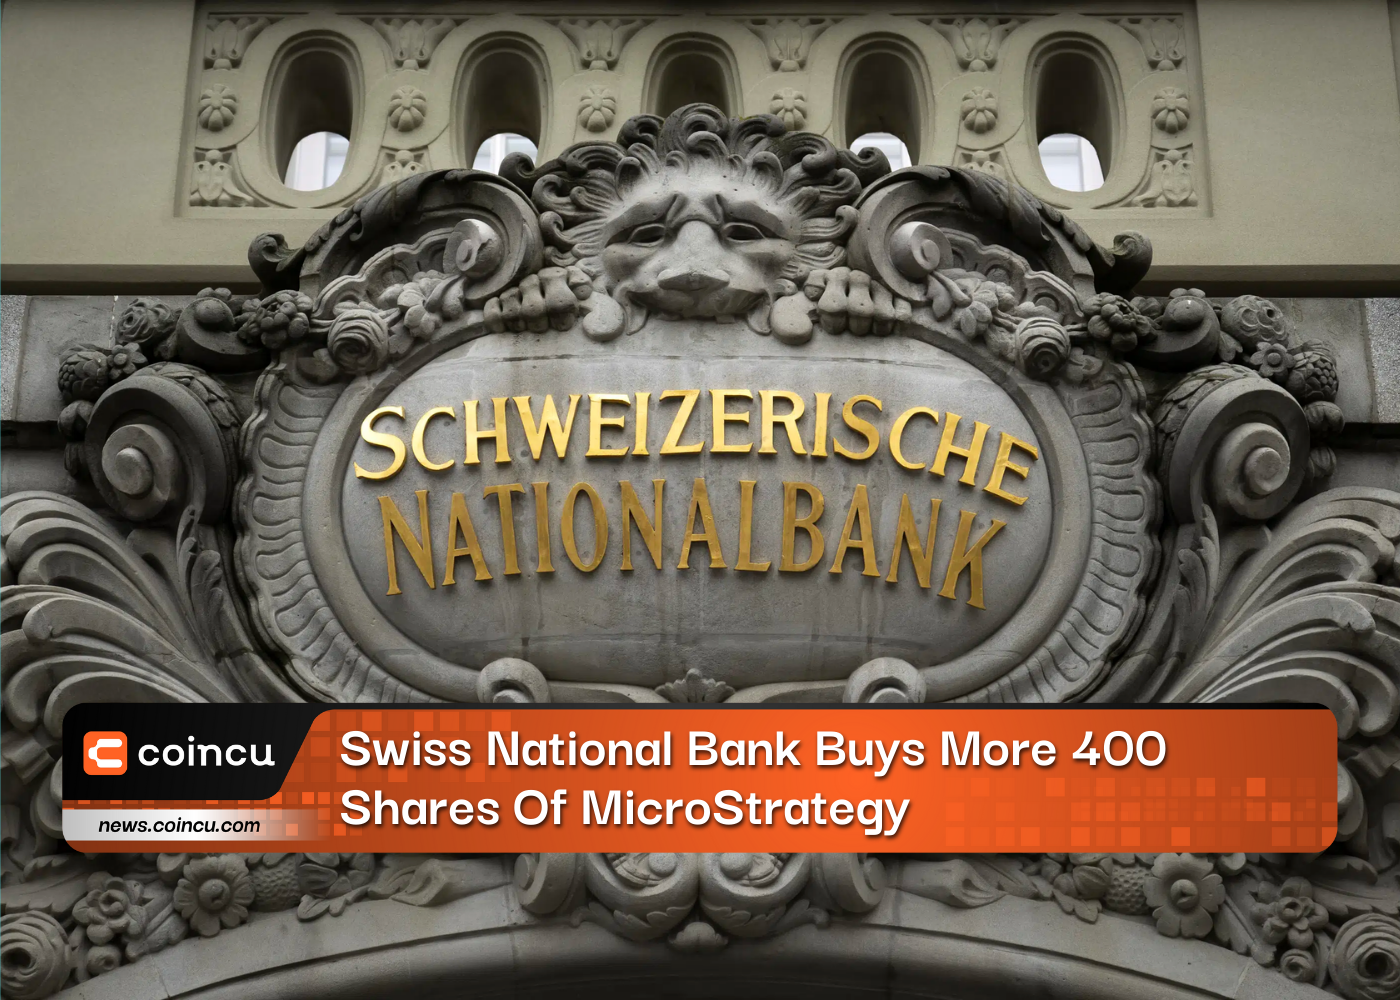 Swiss National Bank Buys More 400 Shares Of MicroStrategy